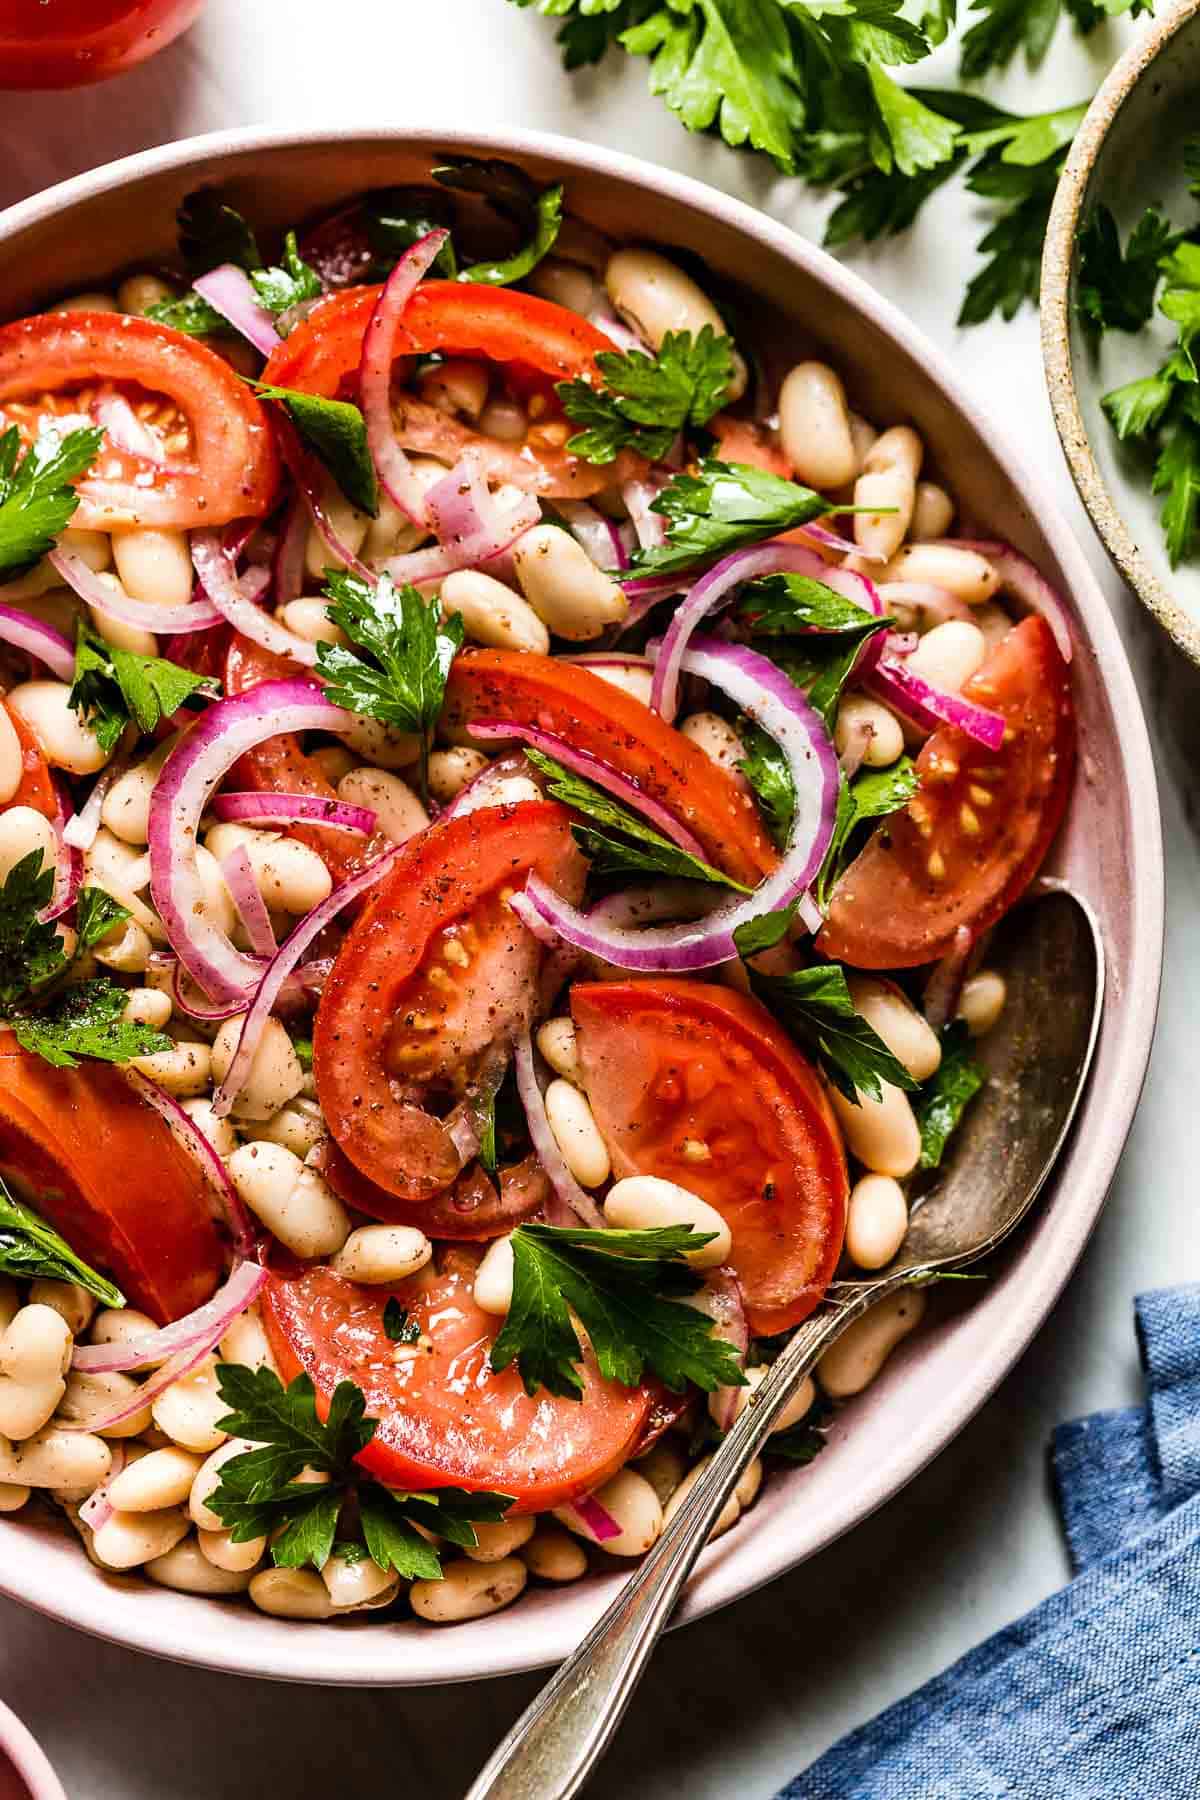 A bowl of white bean cold summer salad from the top view